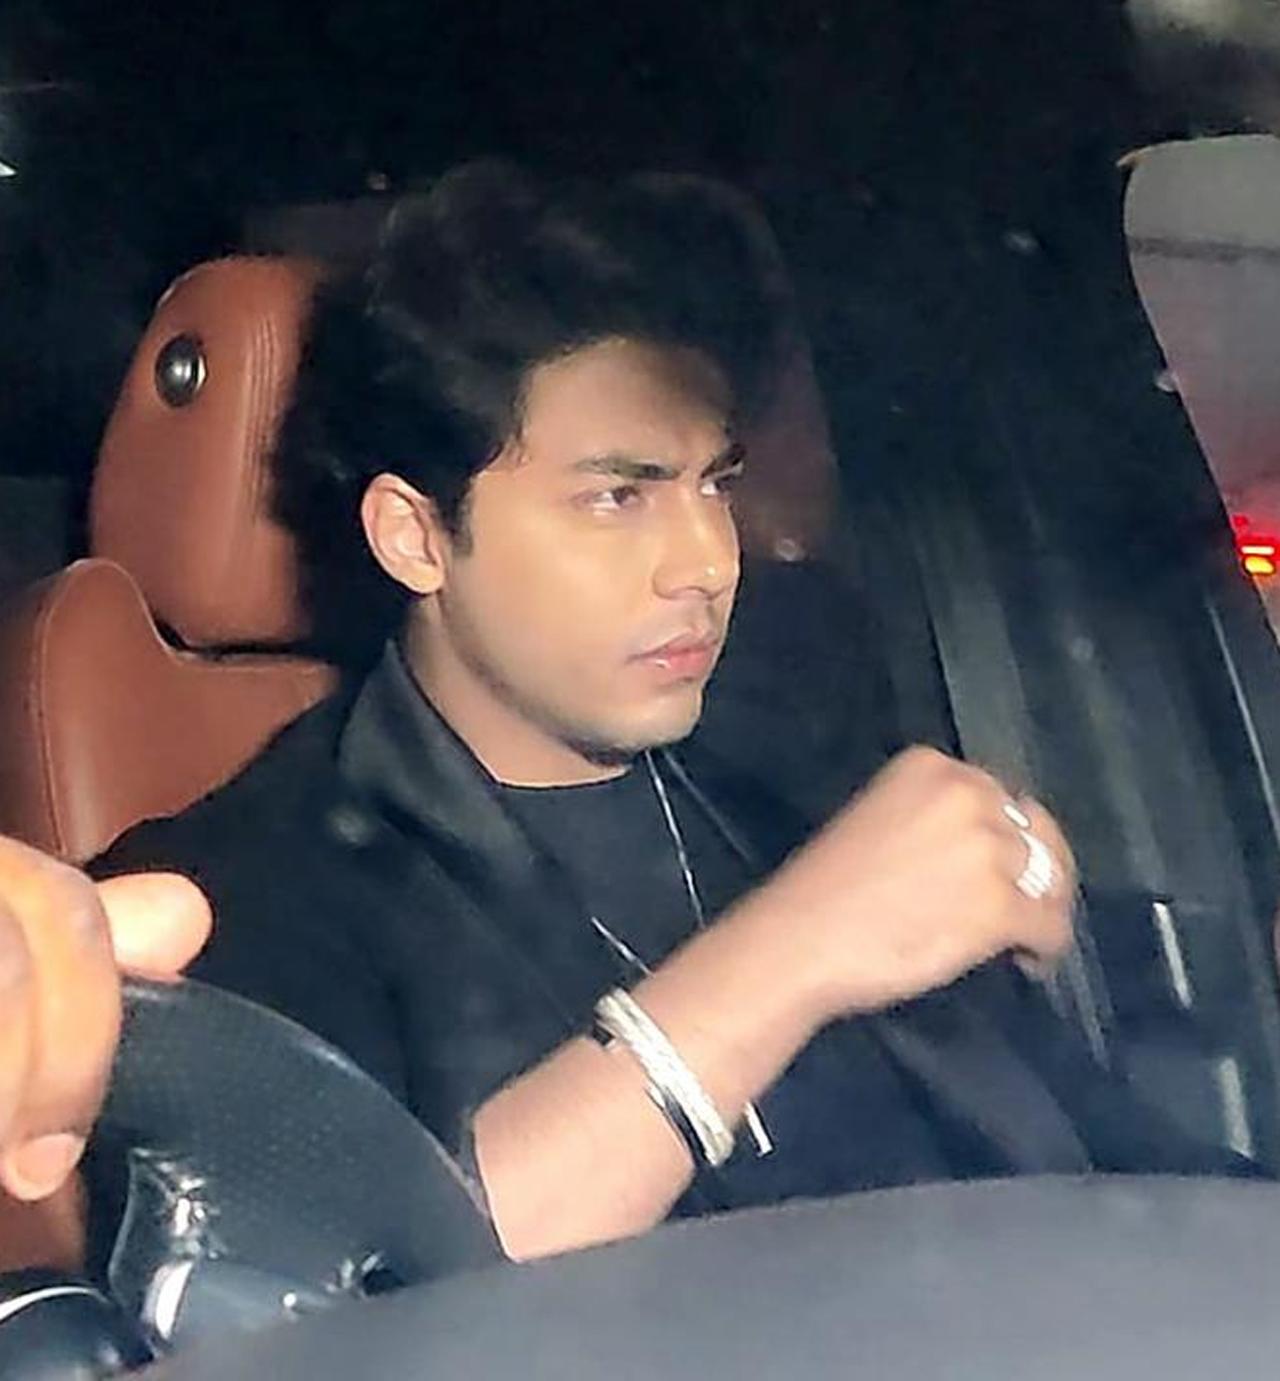 Aryan Khan is now making lots of public appearances. He also donned a black jacket and that swagger is on point.